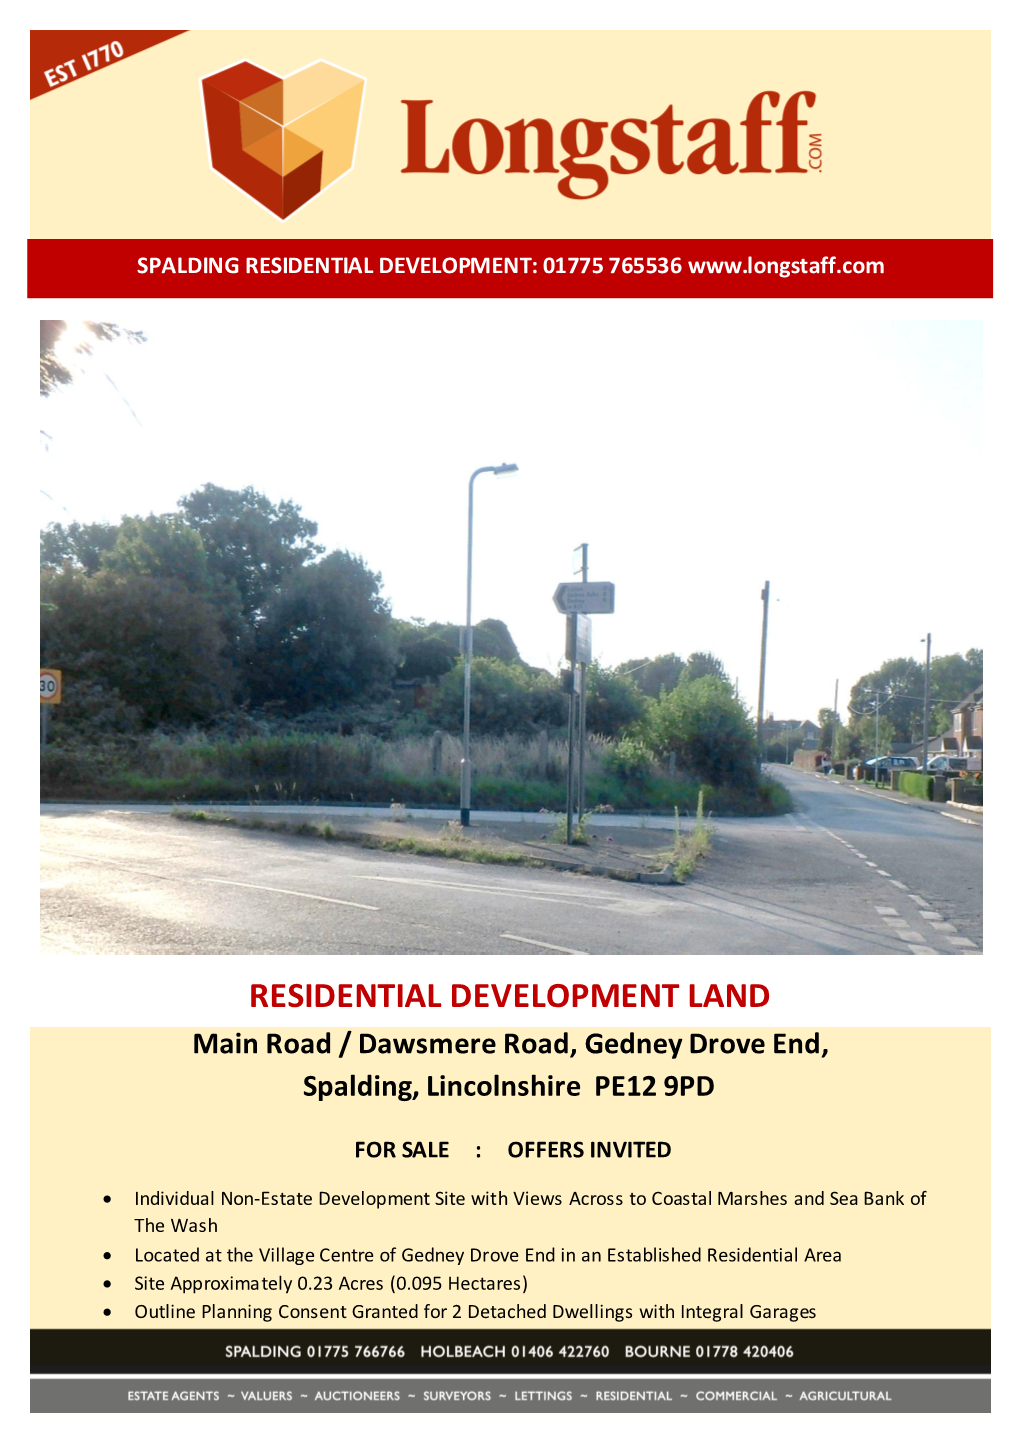 RESIDENTIAL DEVELOPMENT LAND Main Road / Dawsmere Road, Gedney Drove End, Spalding, Lincolnshire PE12 9PD